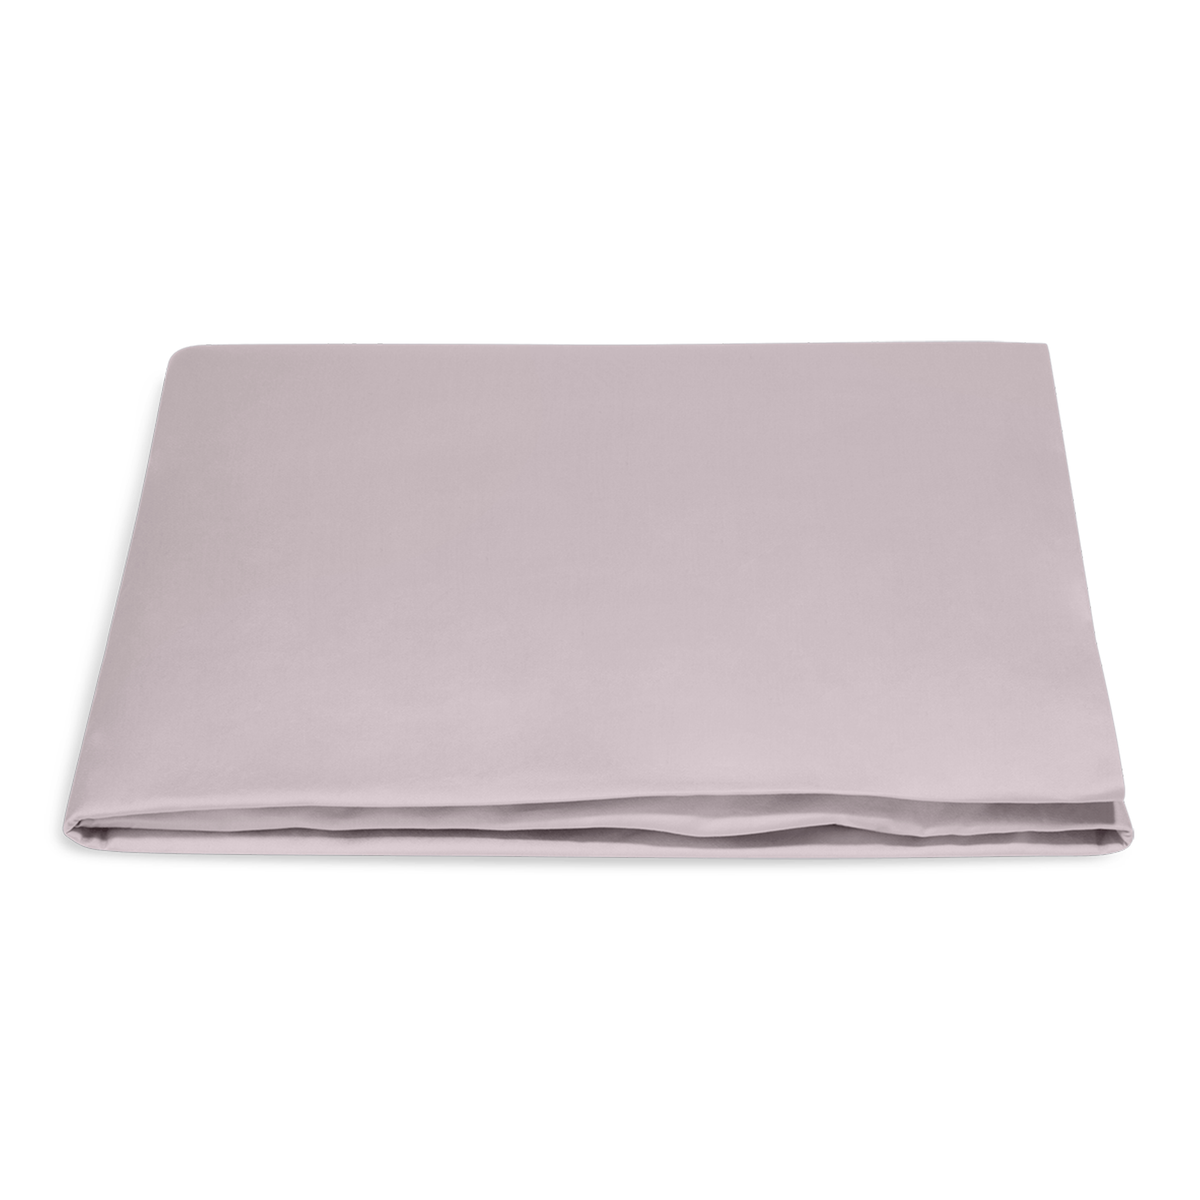 Folded Fitted Sheet of Matouk Nocturne Bedding Collection in Color Deep Lilac